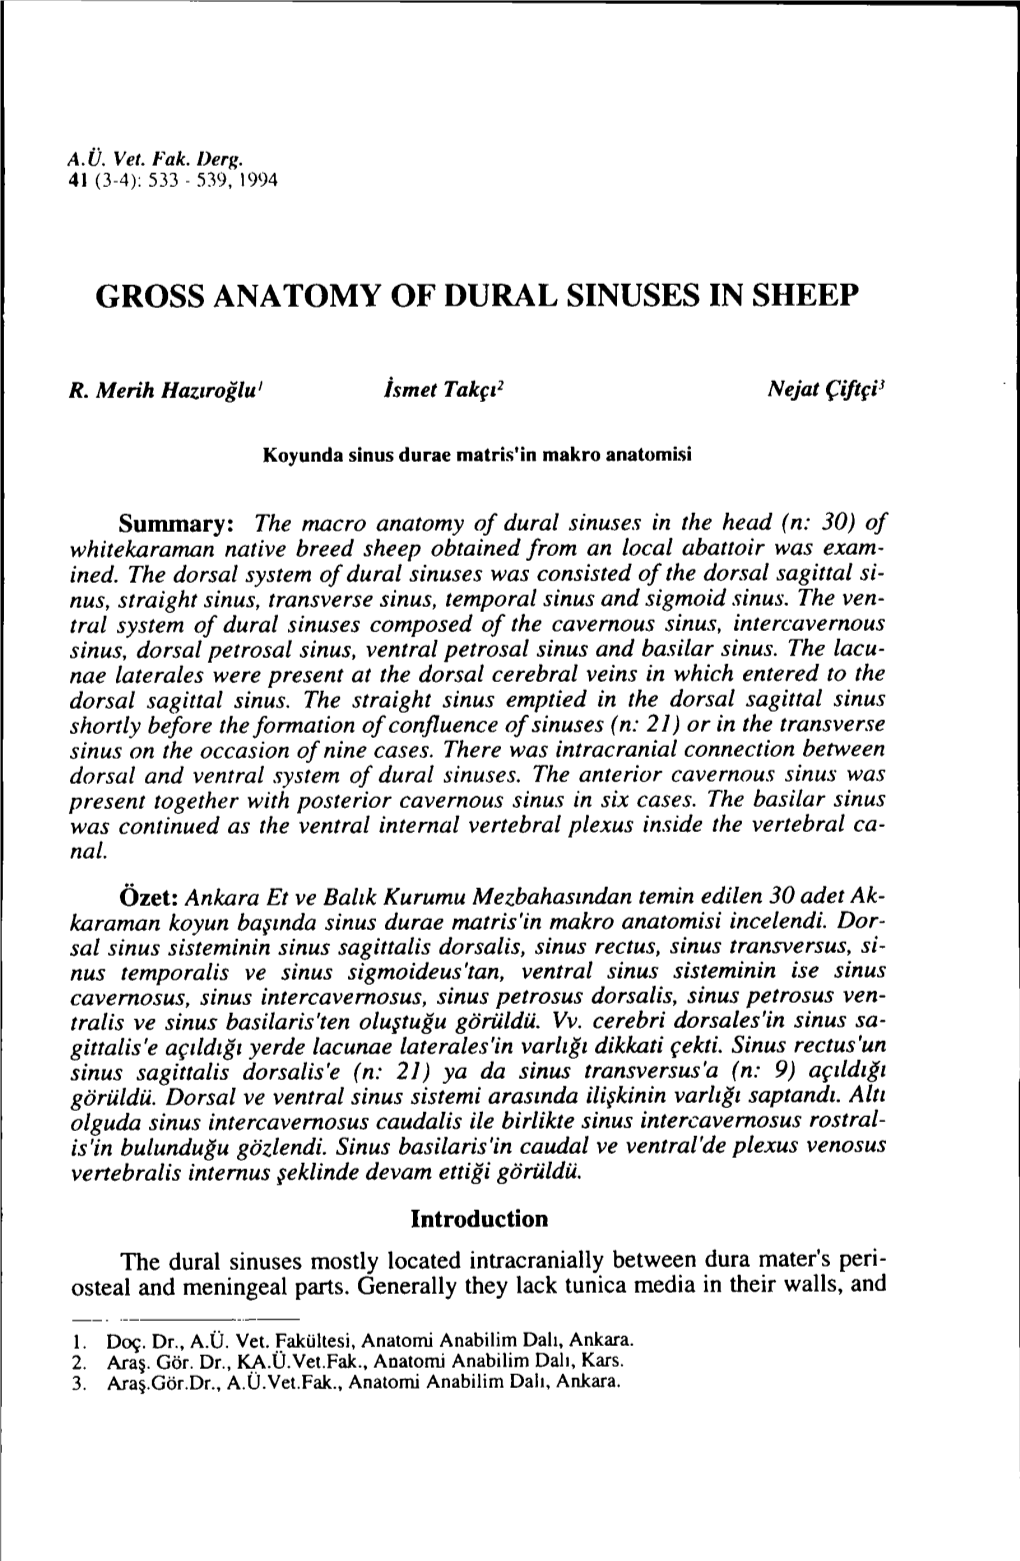 Gross Anatomy of Dural Sinuses in Sheep